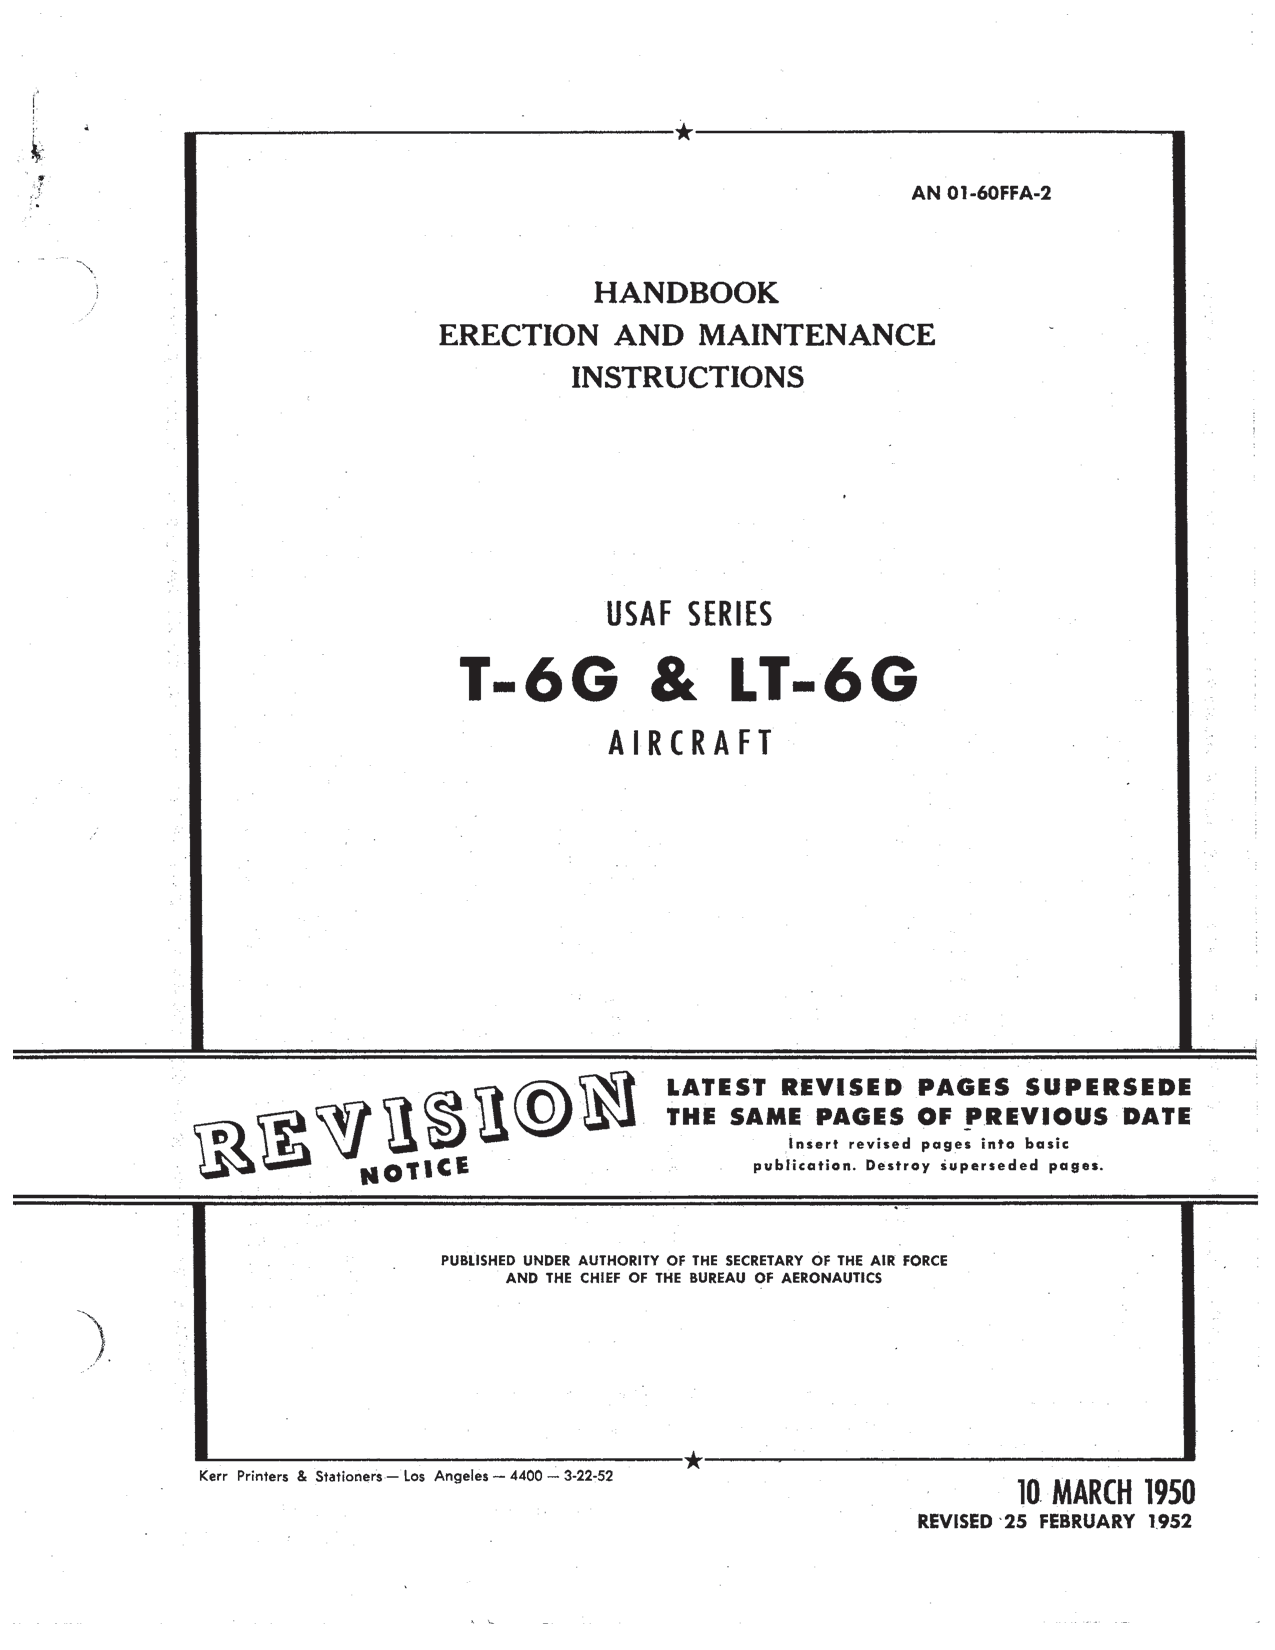 Sample page 1 from AirCorps Library document: Erection & Maintenance - T-6G